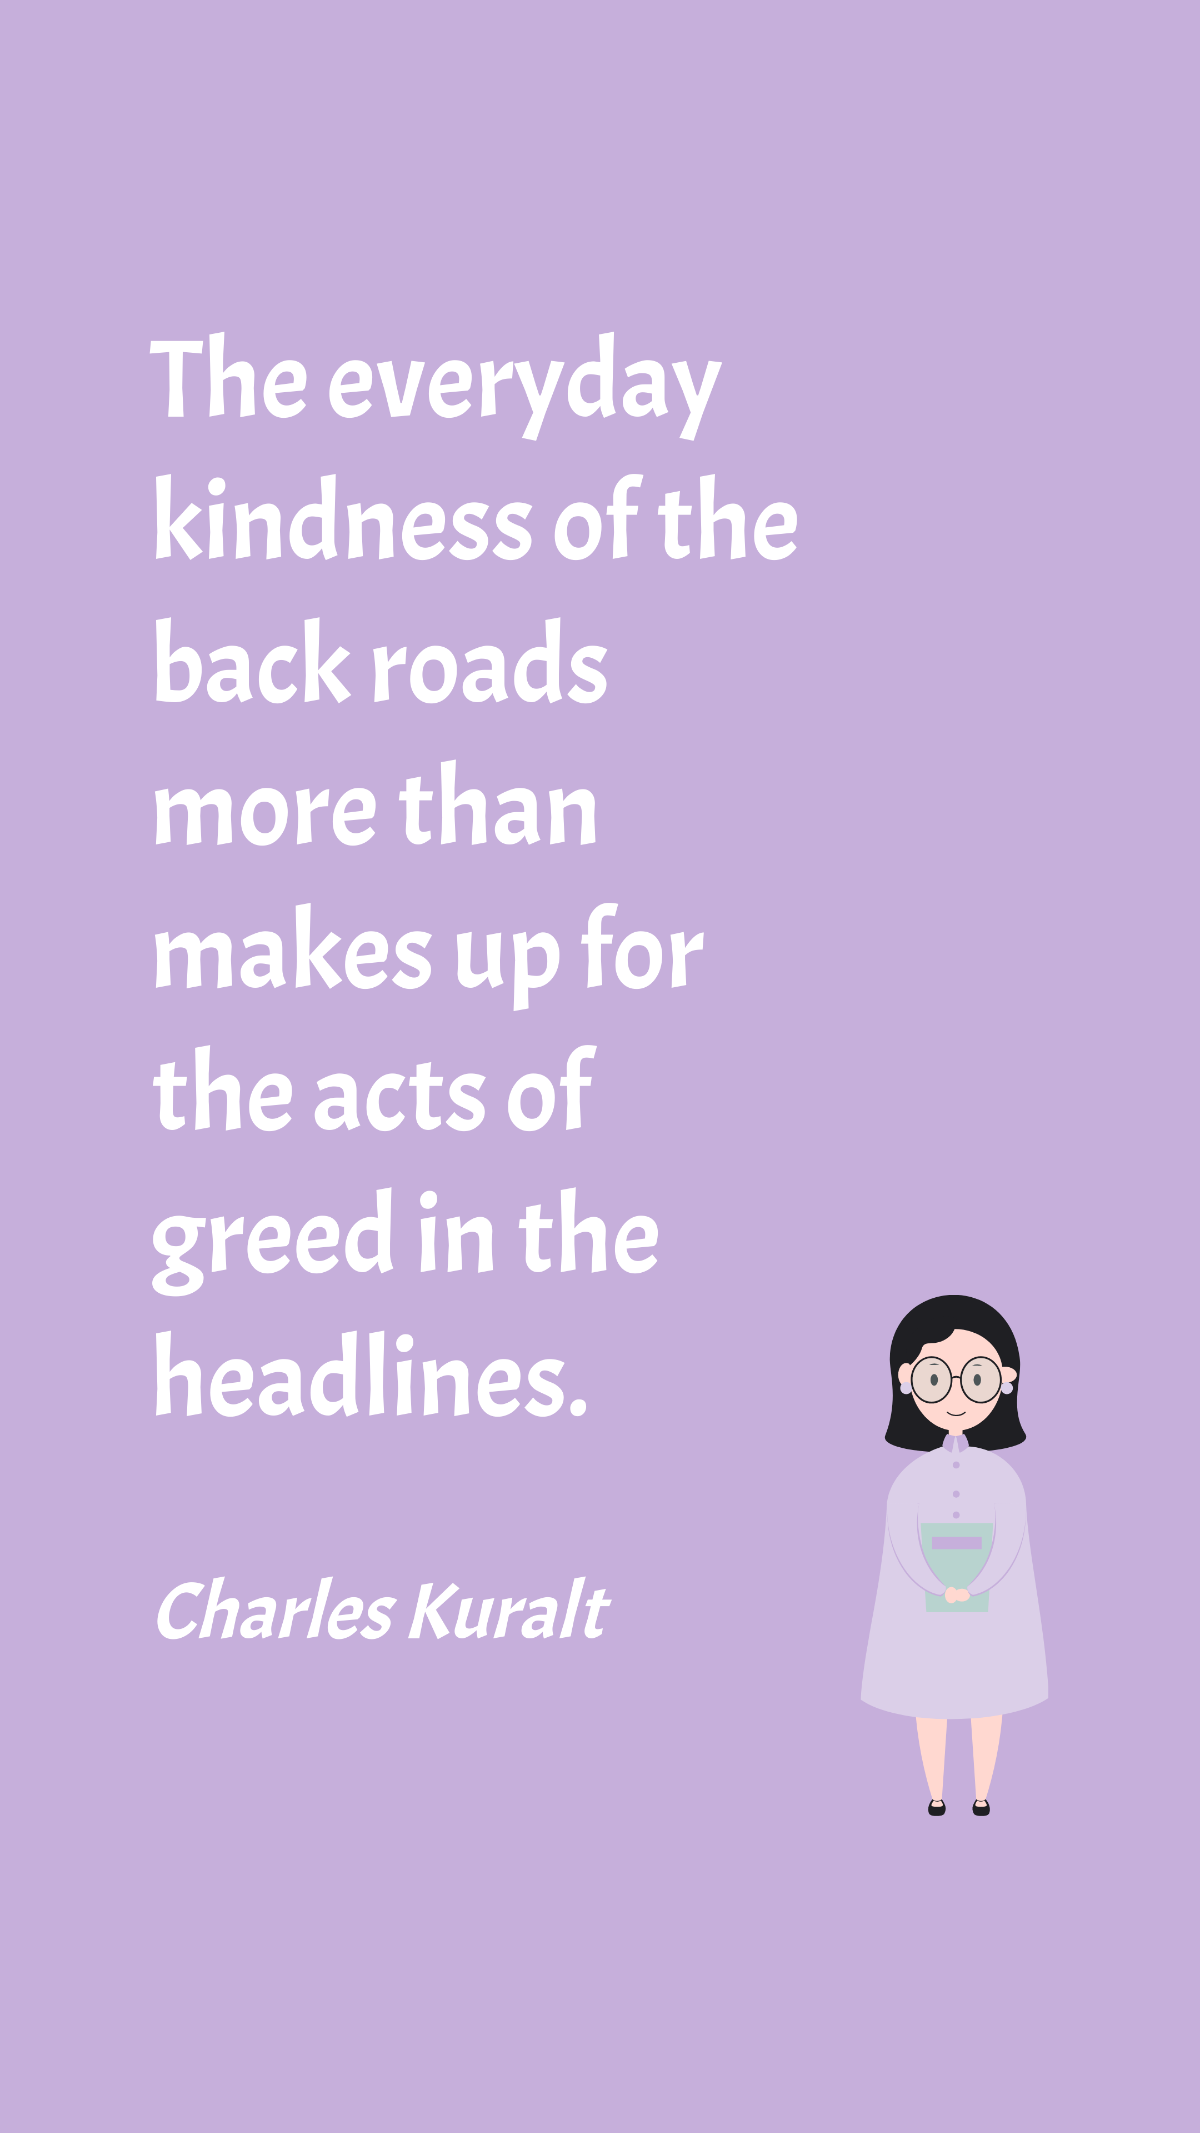 Free Charles Kuralt - The everyday kindness of the back roads more than makes up for the acts of greed in the headlines. Template